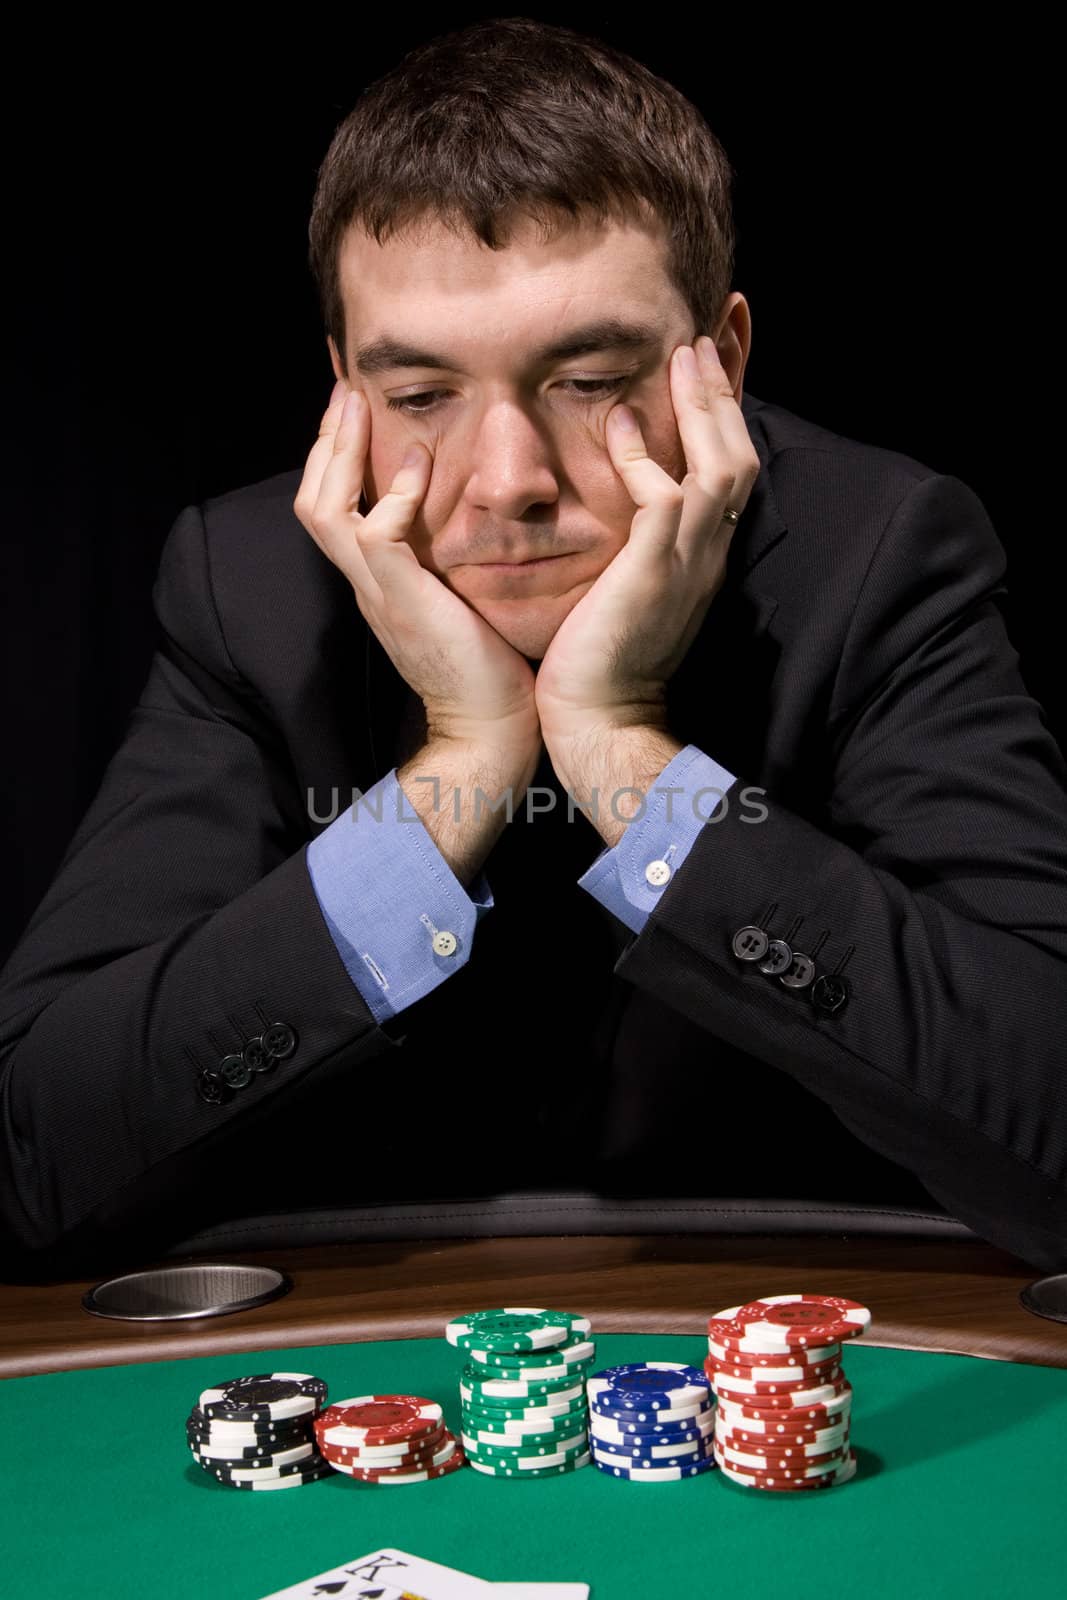 Stylish man in doubt before making bet in the casino